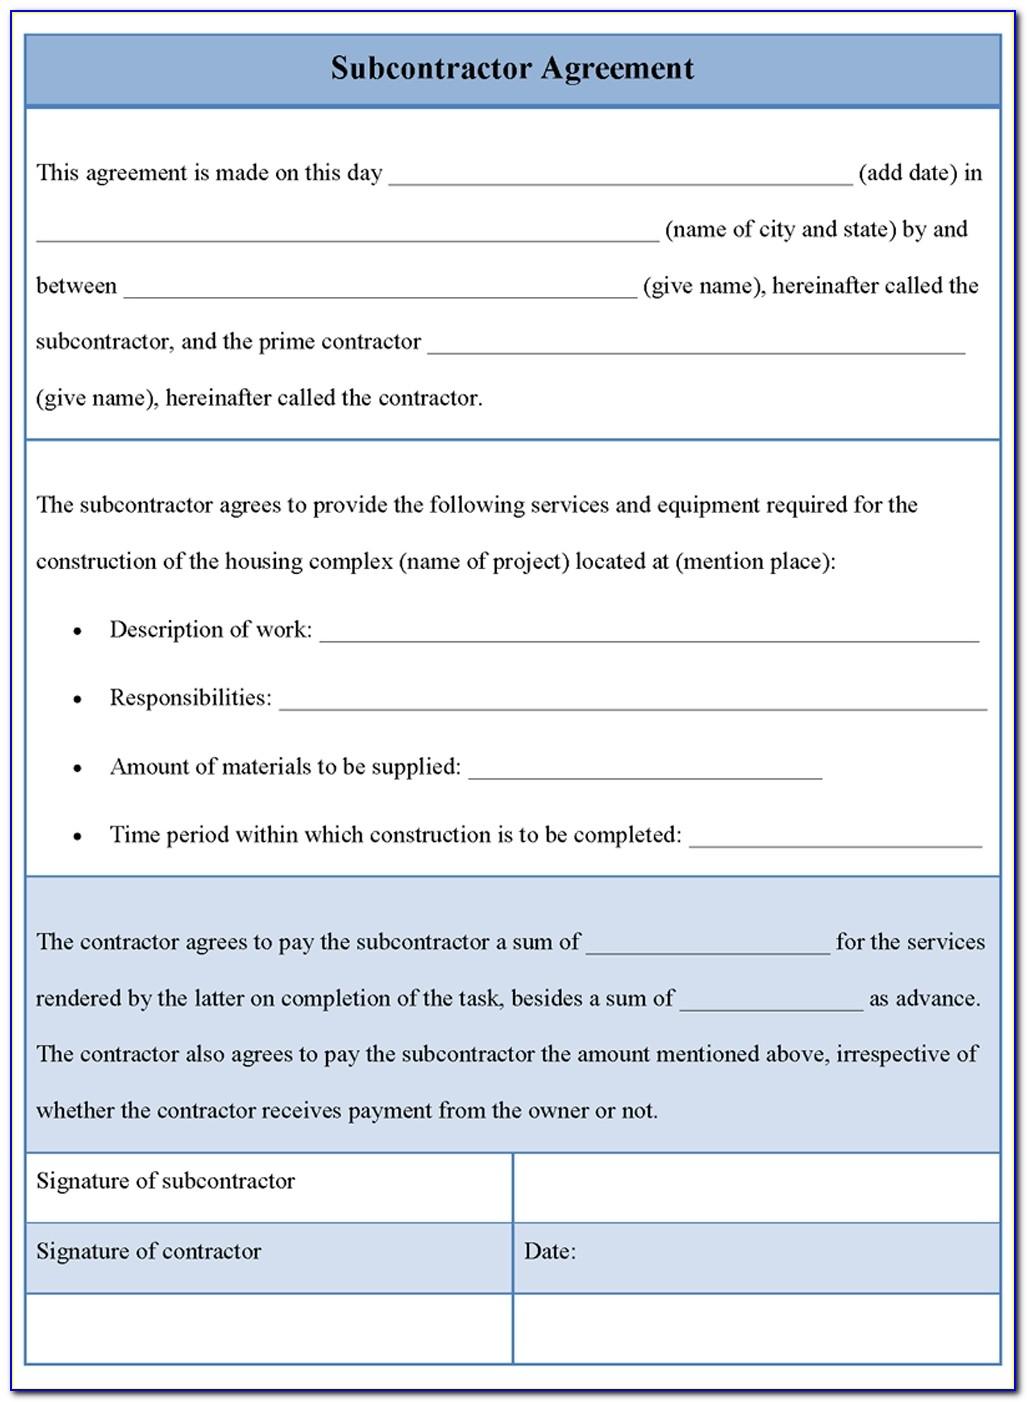 Subcontractor Agreement Template Free Nz